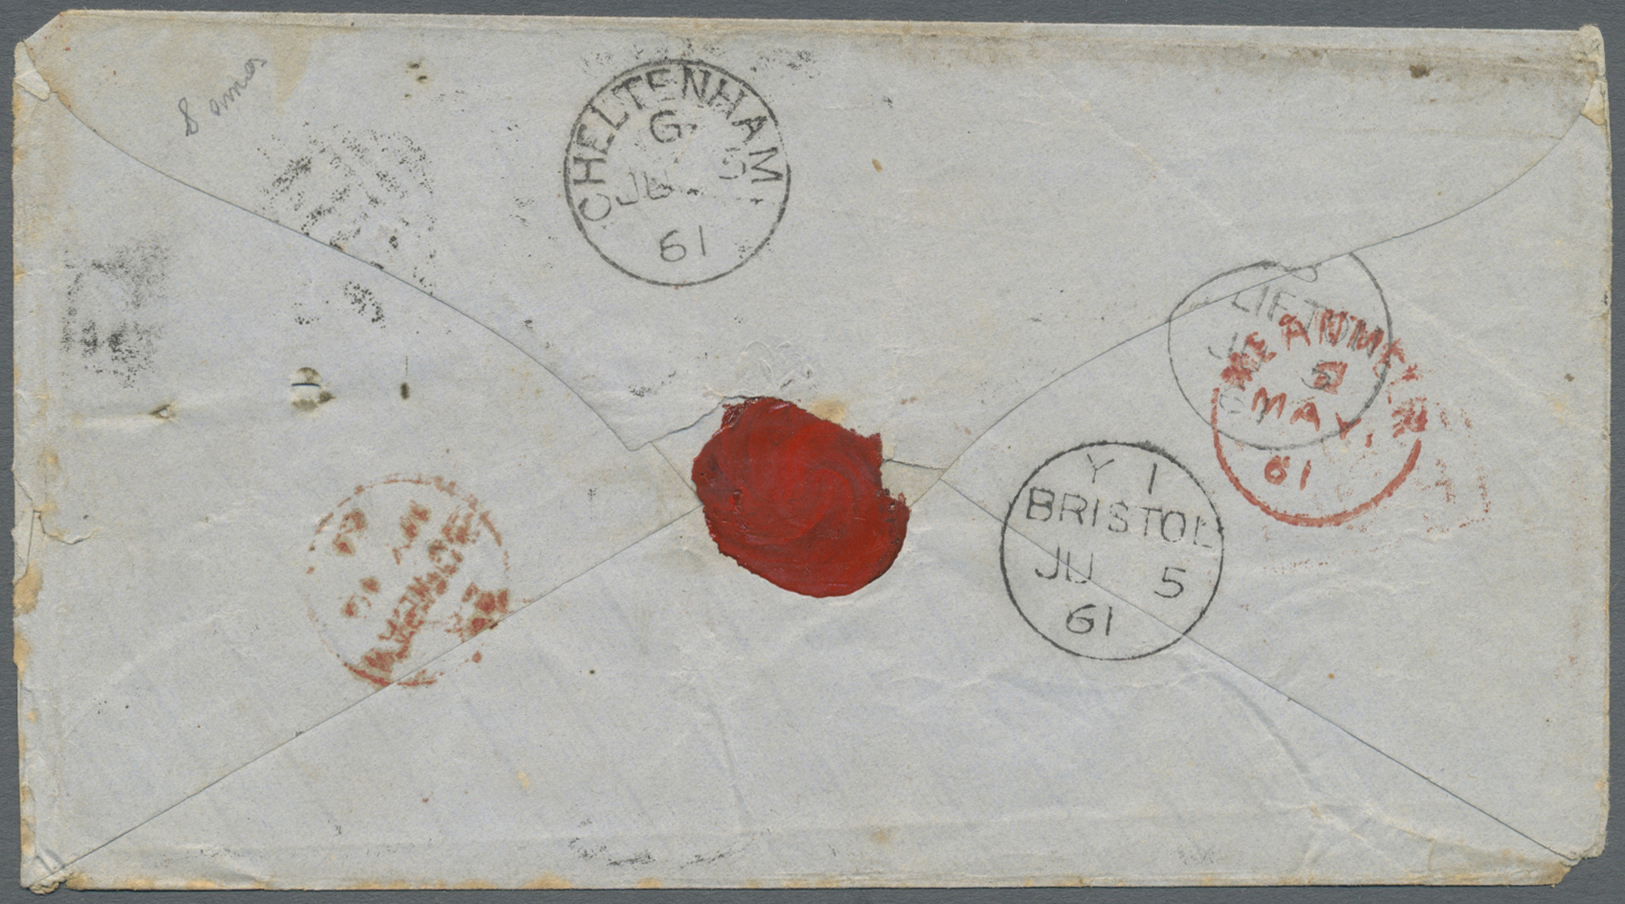 Br Indien: 1861. Envelope (small Faults) Addressed To England Bearing SG 36, 8a Carmine On Blue Glazed Paper Tied By '16 - Autres & Non Classés